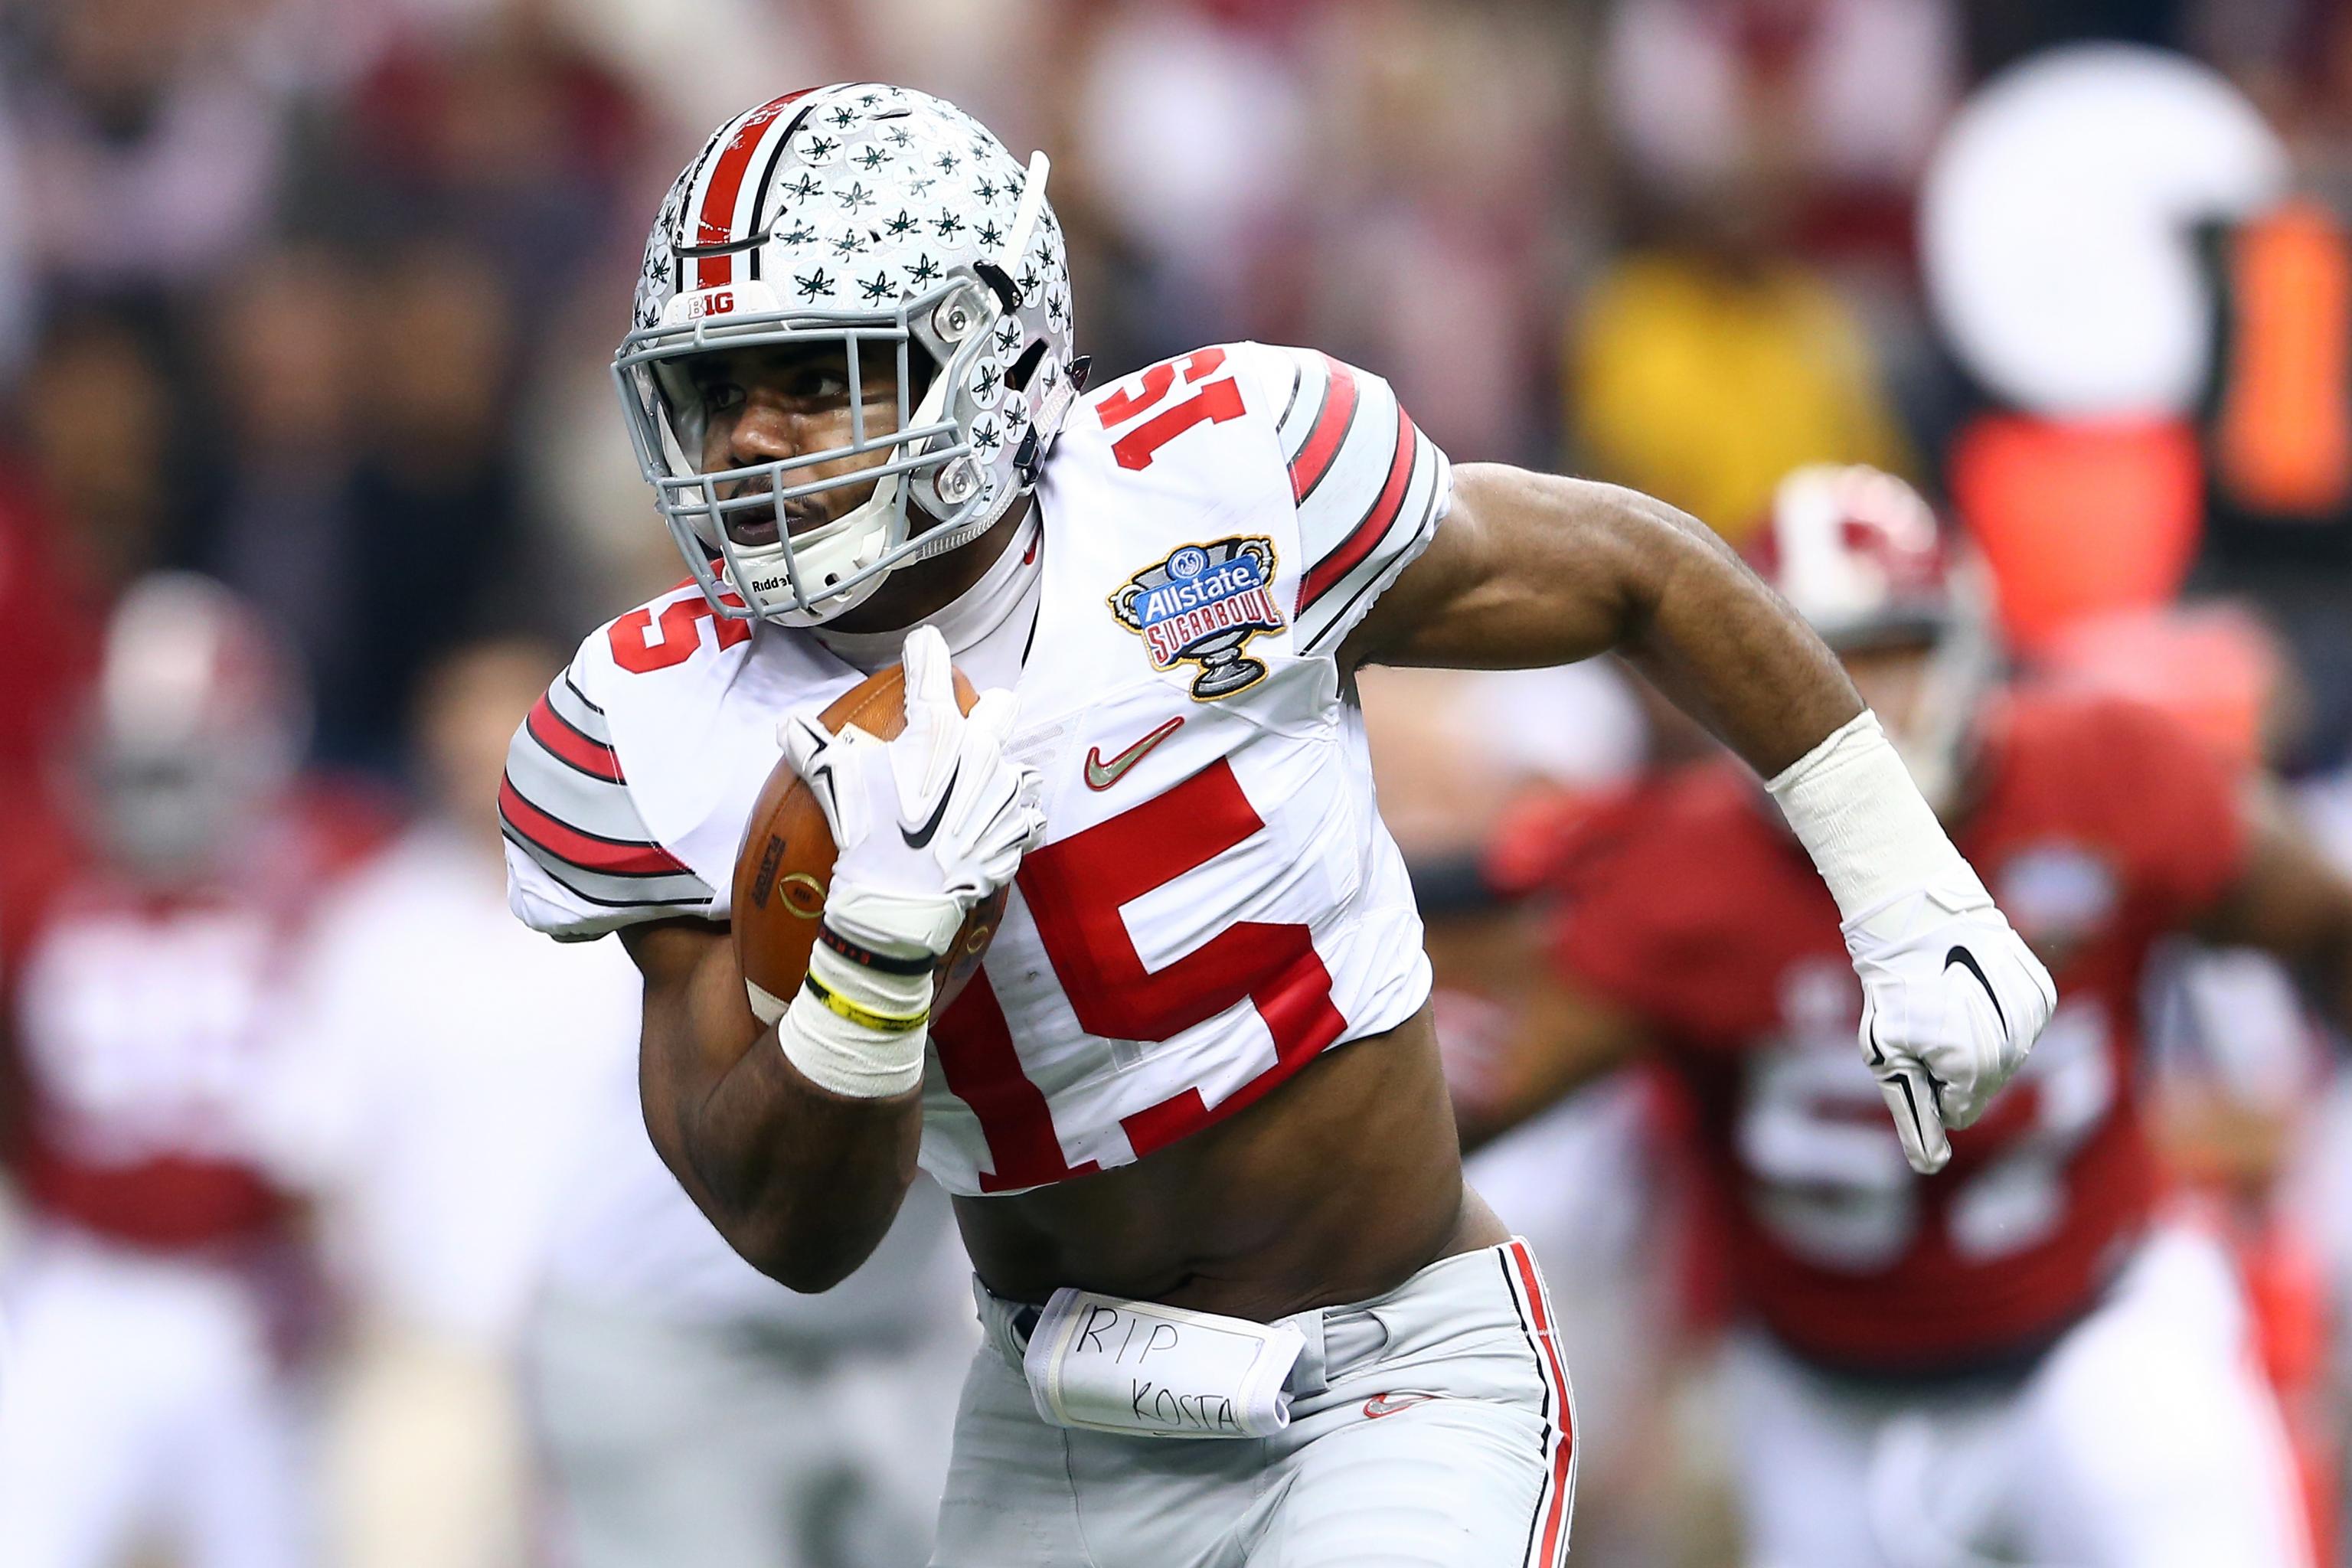 NCAA Bans College Football Players from Wearing 'Crop Top' Jerseys